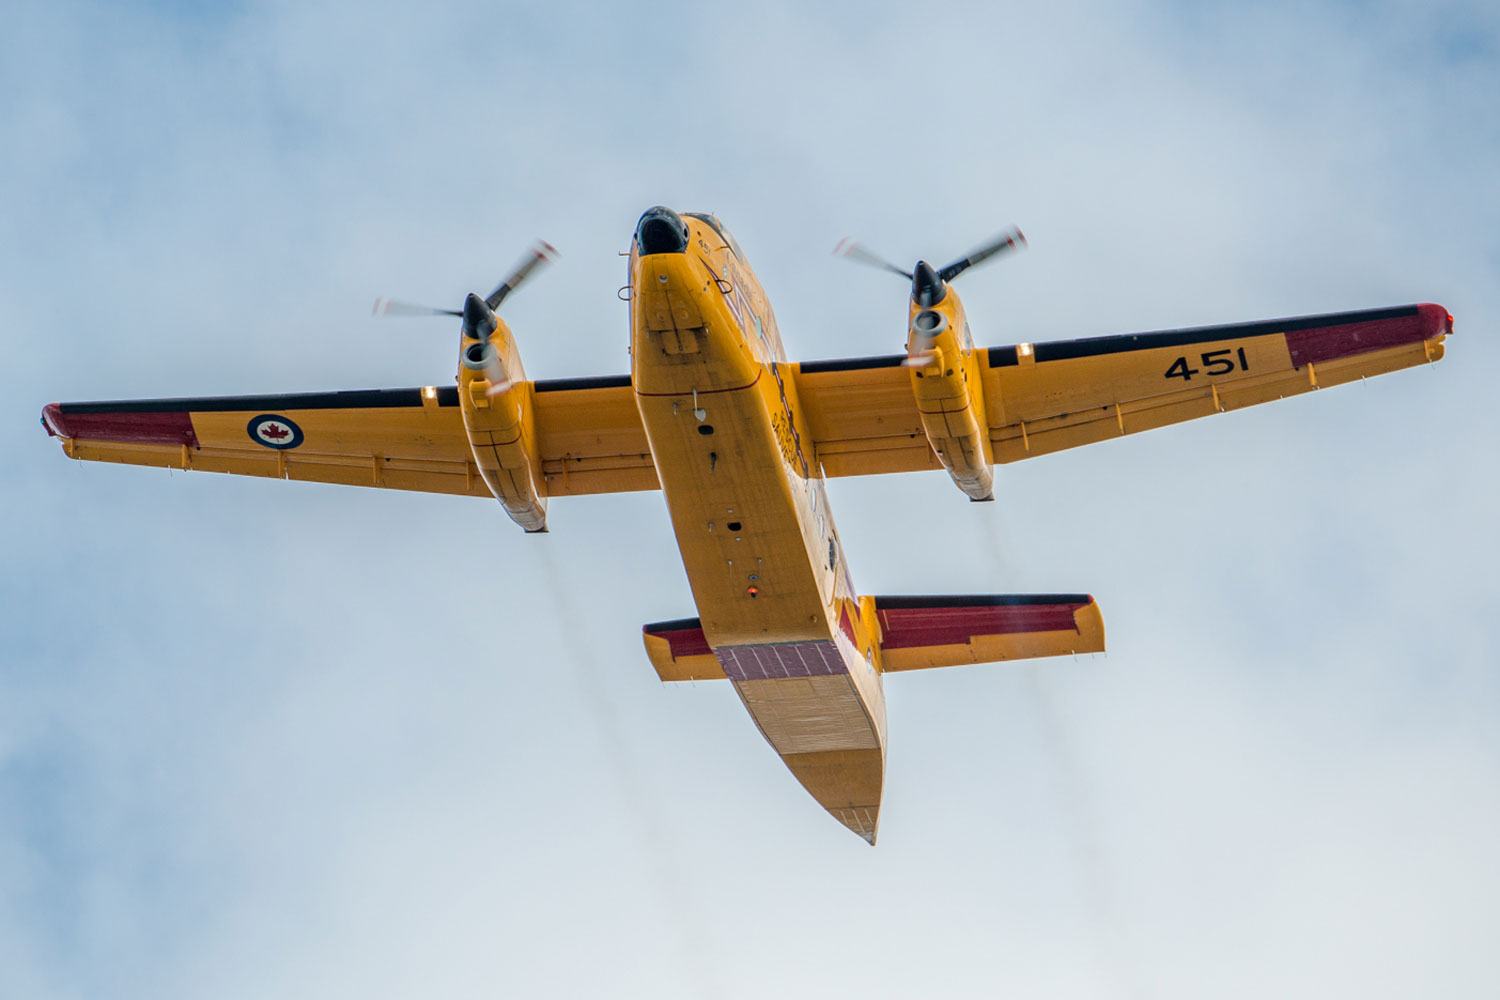 DHC-5 Buffalo in Canada after nearly 55 years Air Data News